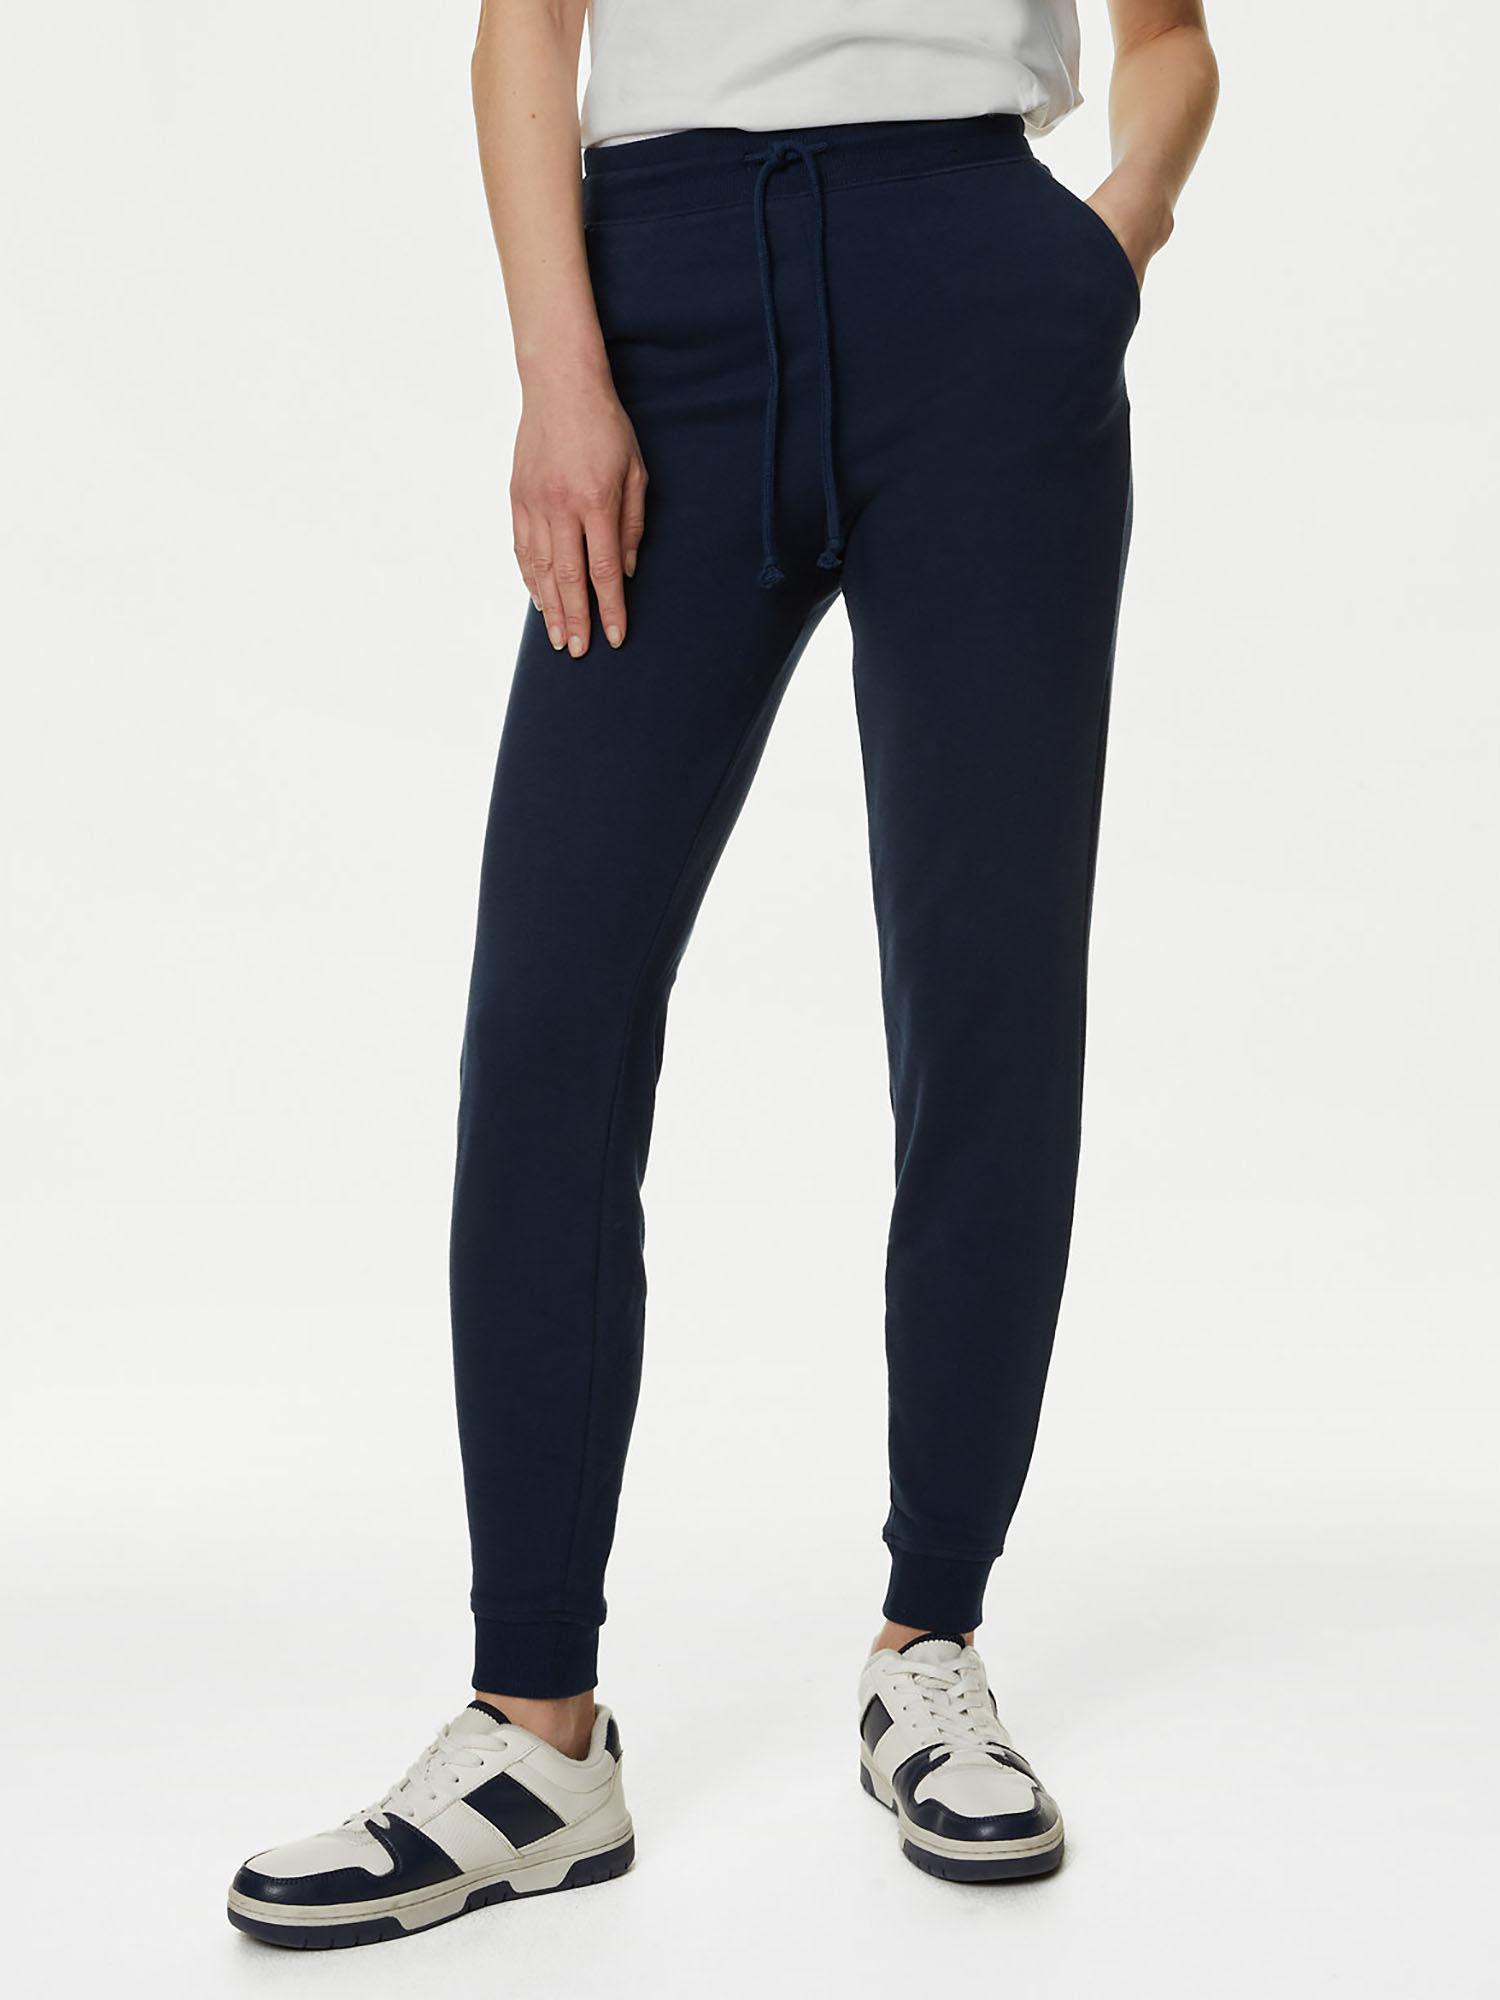 the navy blue cotton rich cuffed joggers